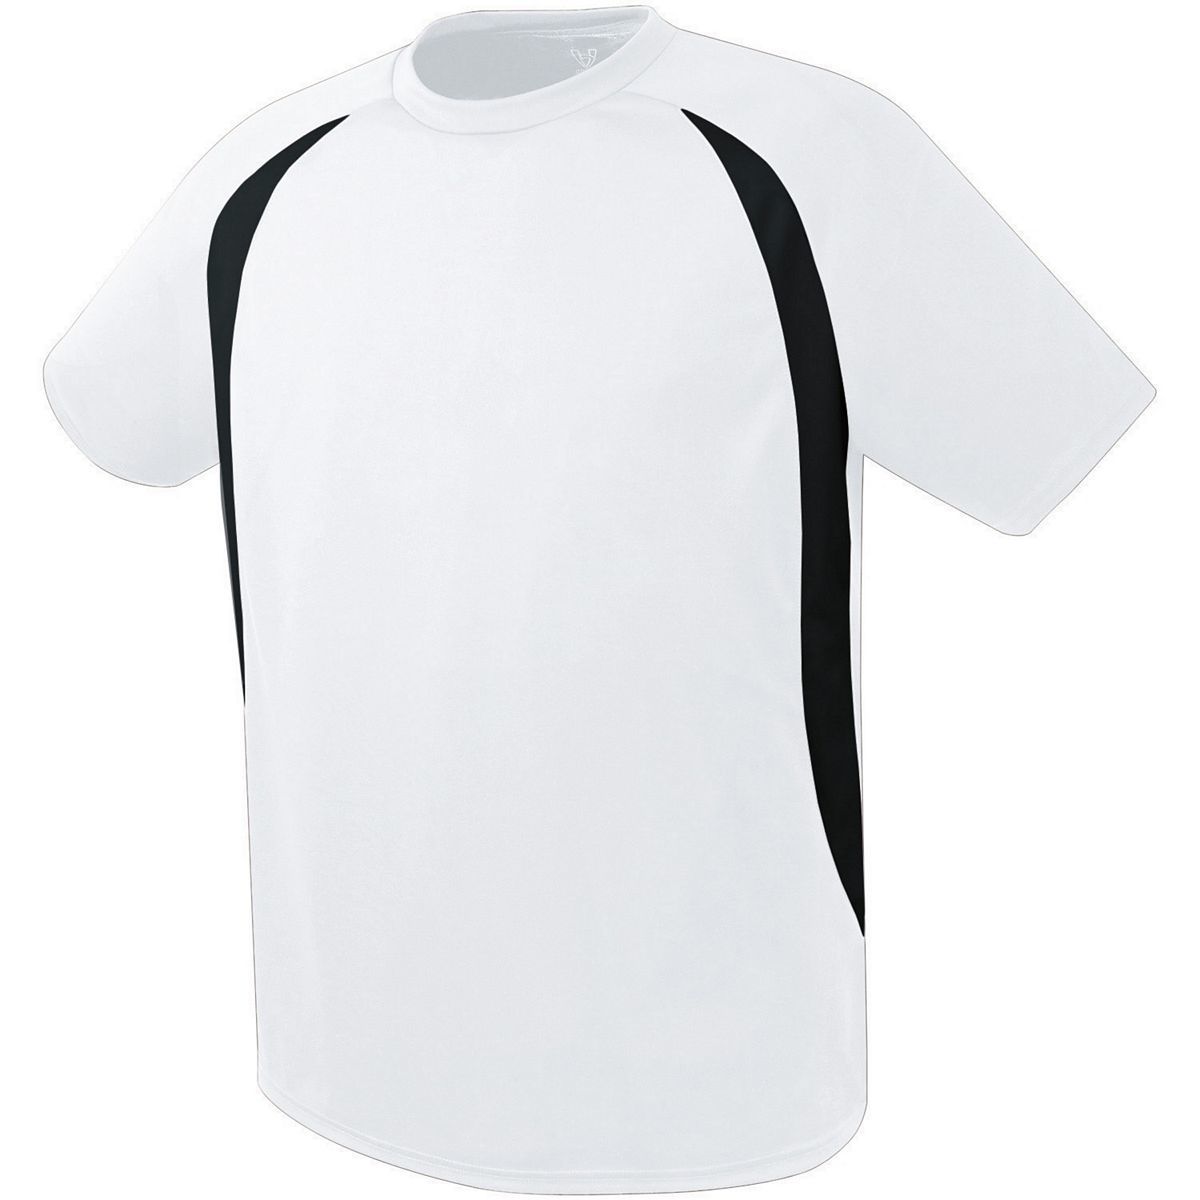 High 5 Youth Liberty Soccer Jersey in White/Black  -Part of the Youth, Youth-Jersey, High5-Products, Soccer, Shirts, All-Sports-1 product lines at KanaleyCreations.com